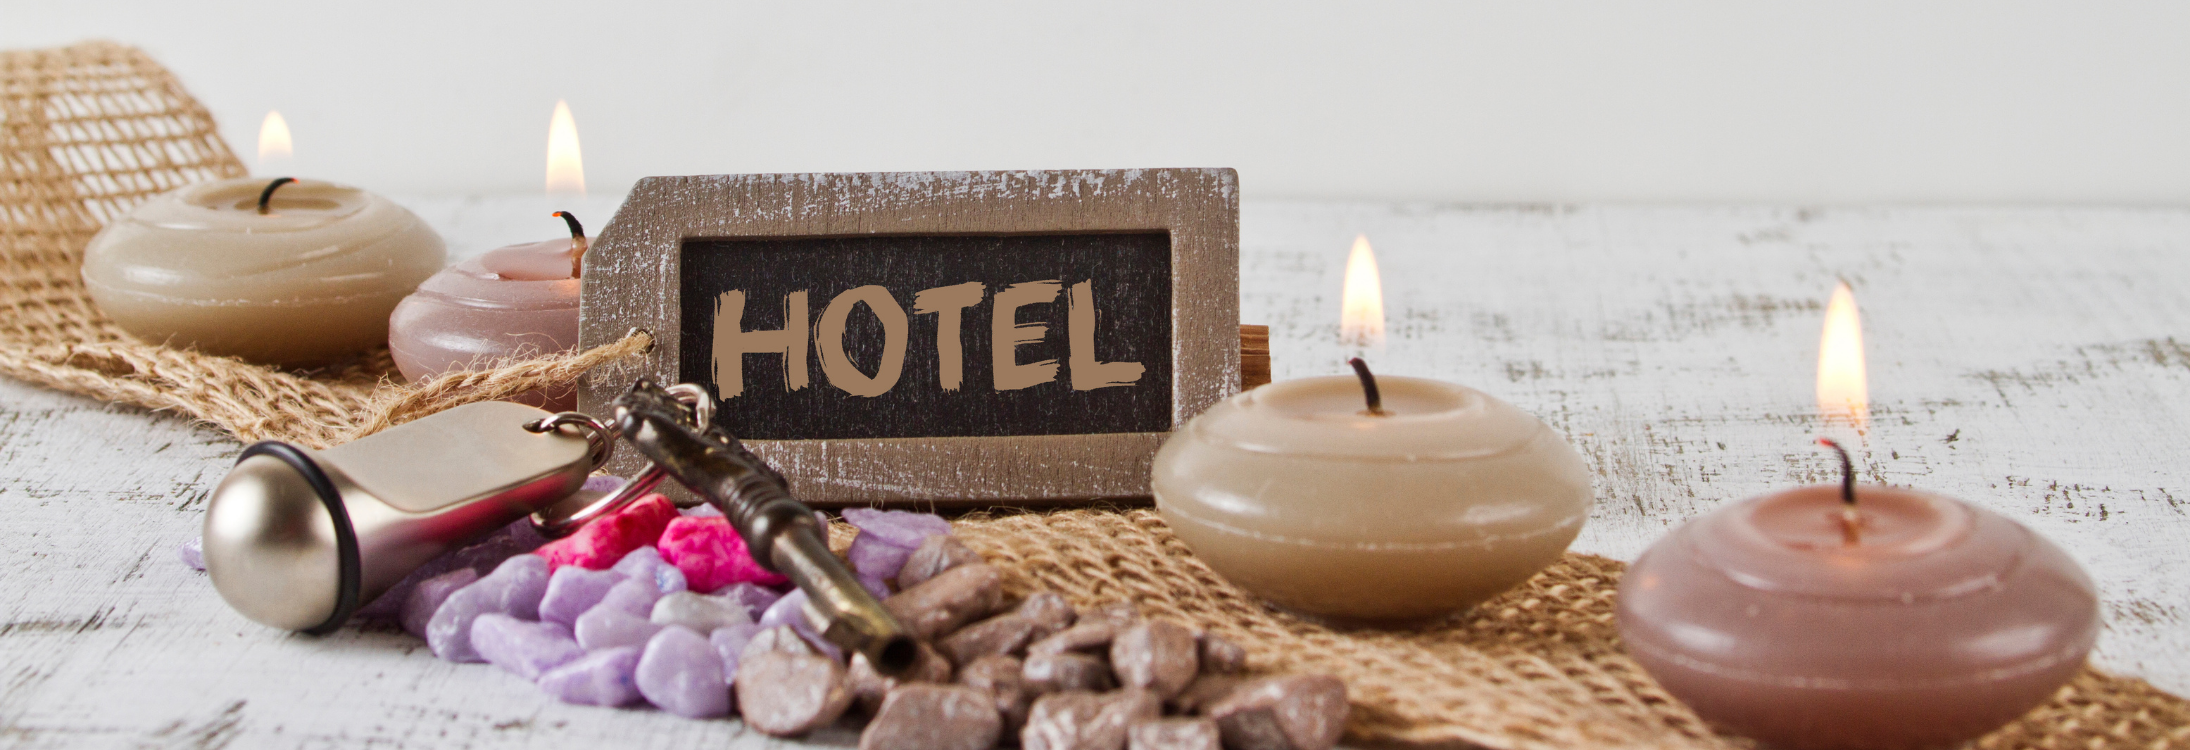 Reasons why hotels charge exorbitantly high on some days